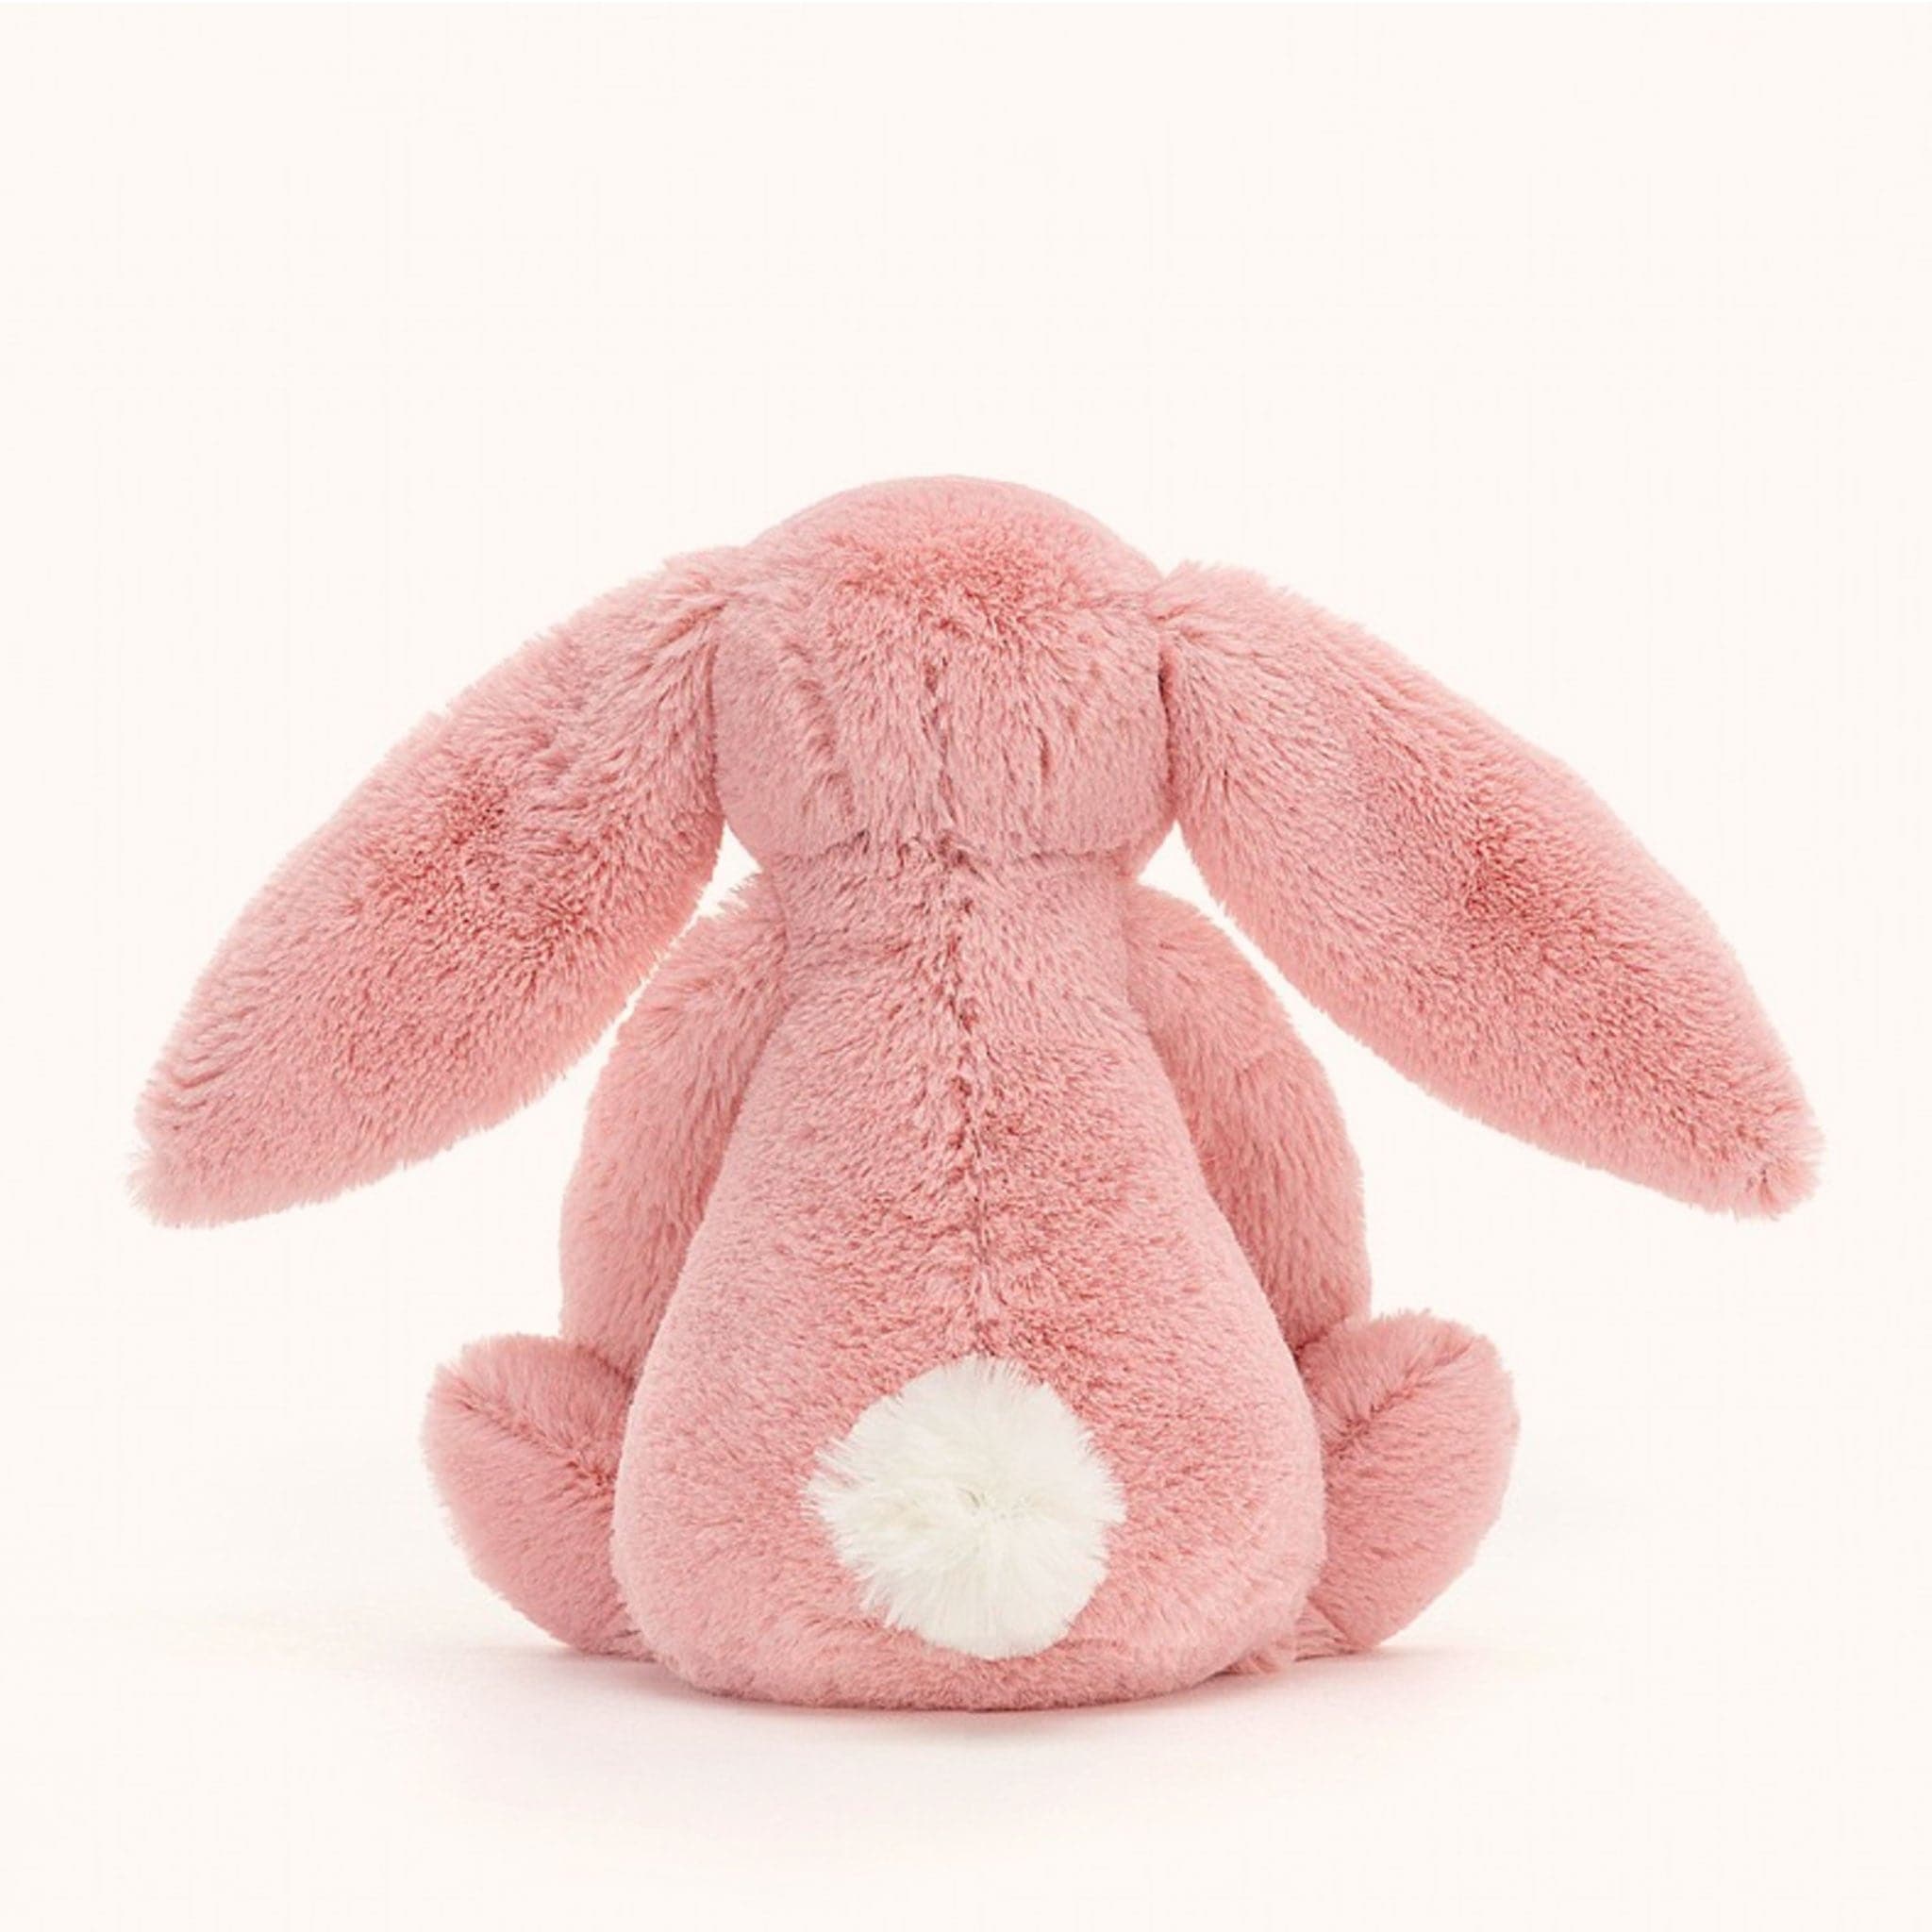 The back view of the fuzzy pink bunny stuffed animal with a white fuzzy ball as a tail and long floppy ears.